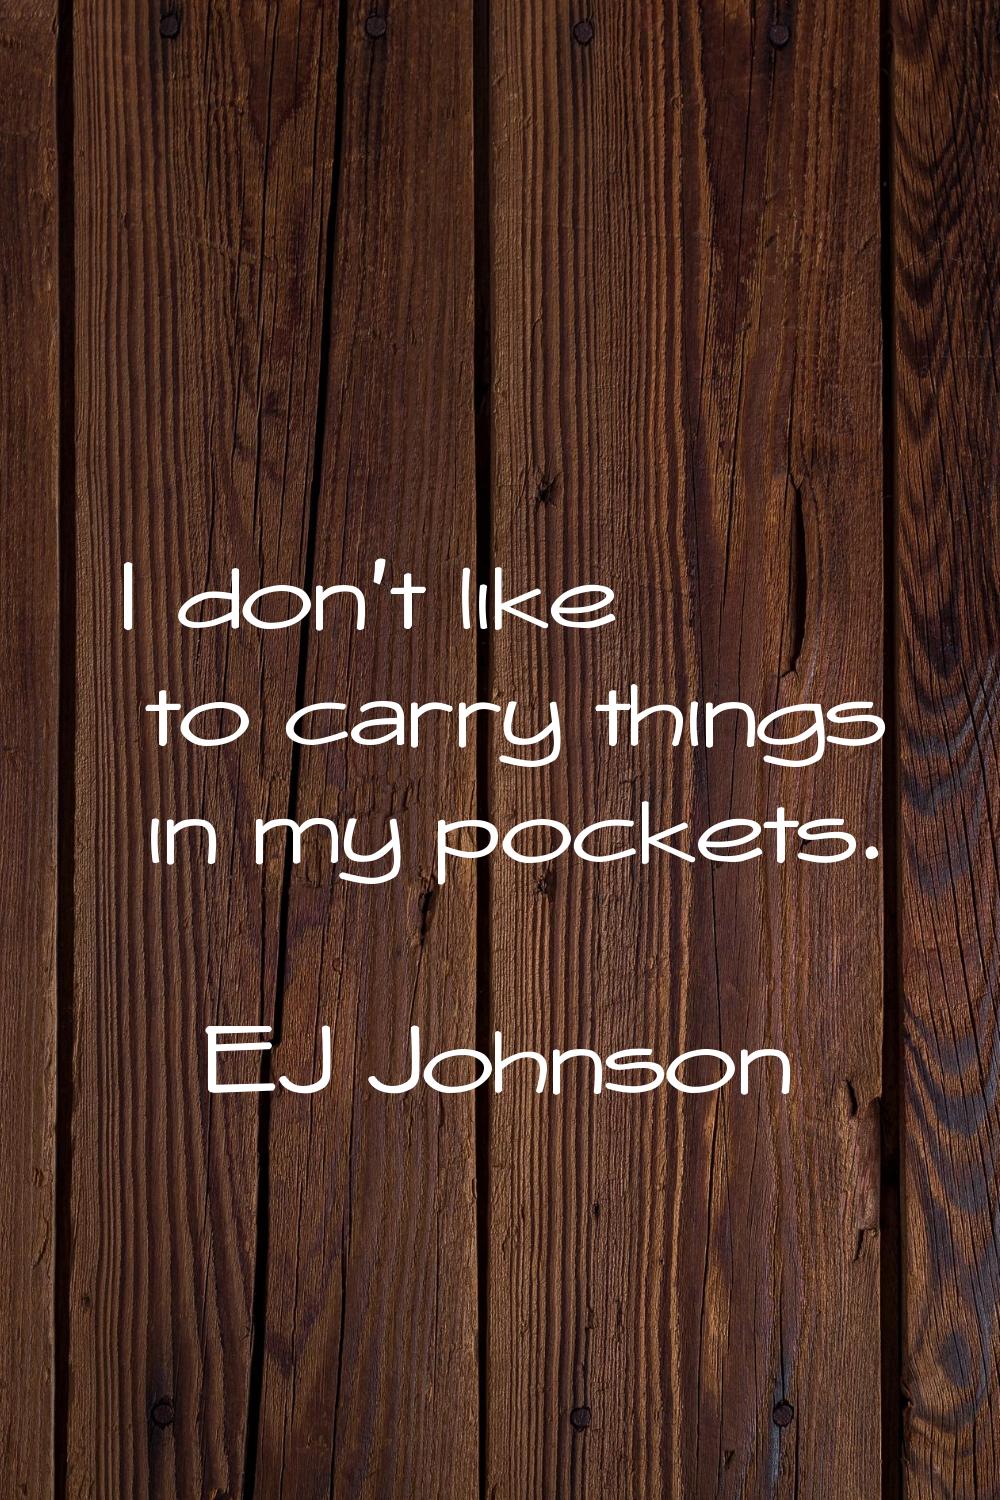 I don't like to carry things in my pockets.